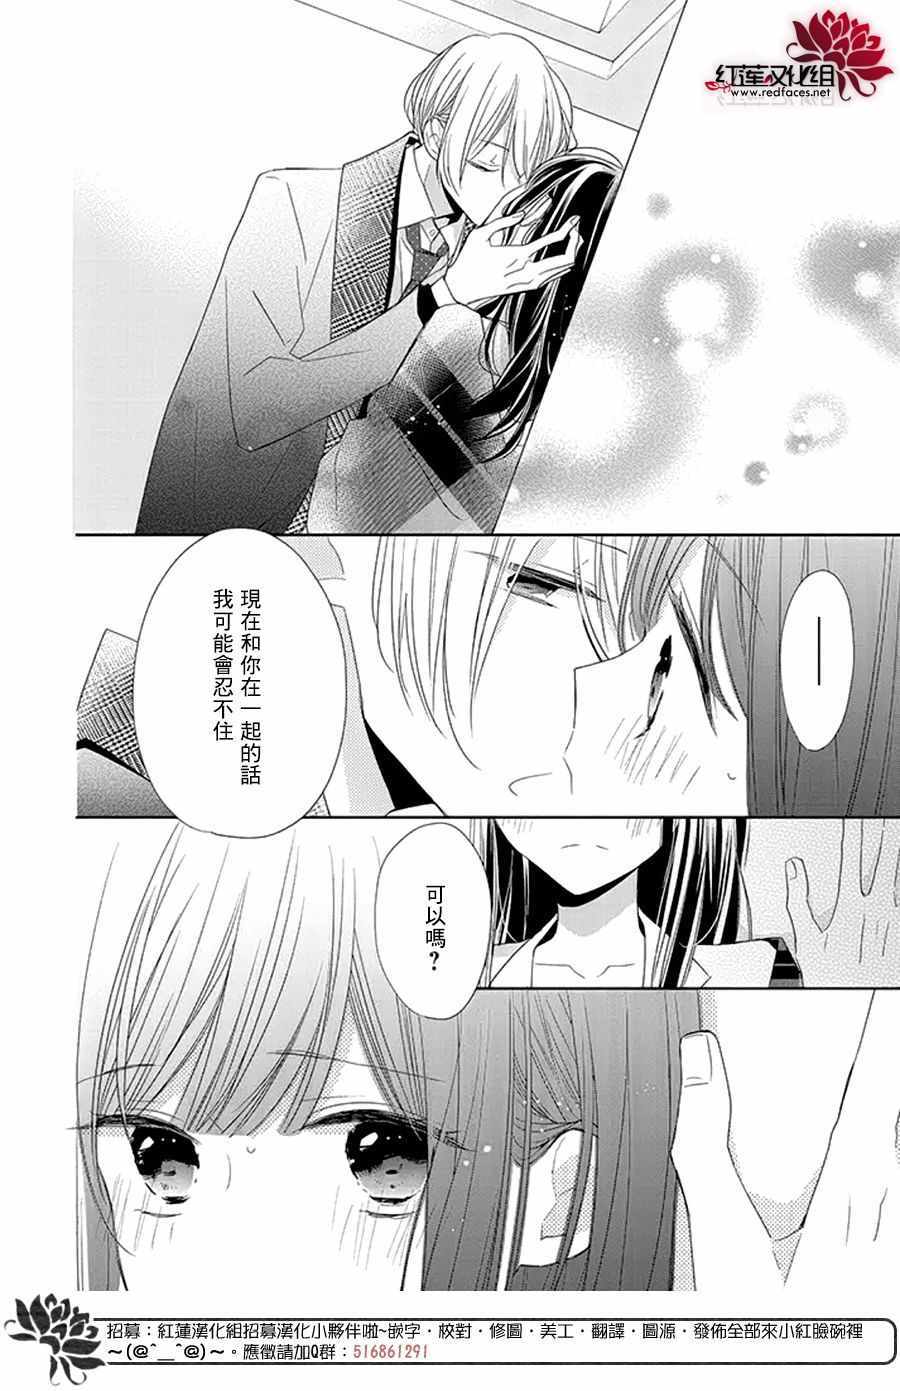 If given a second chance - 20話 - 4